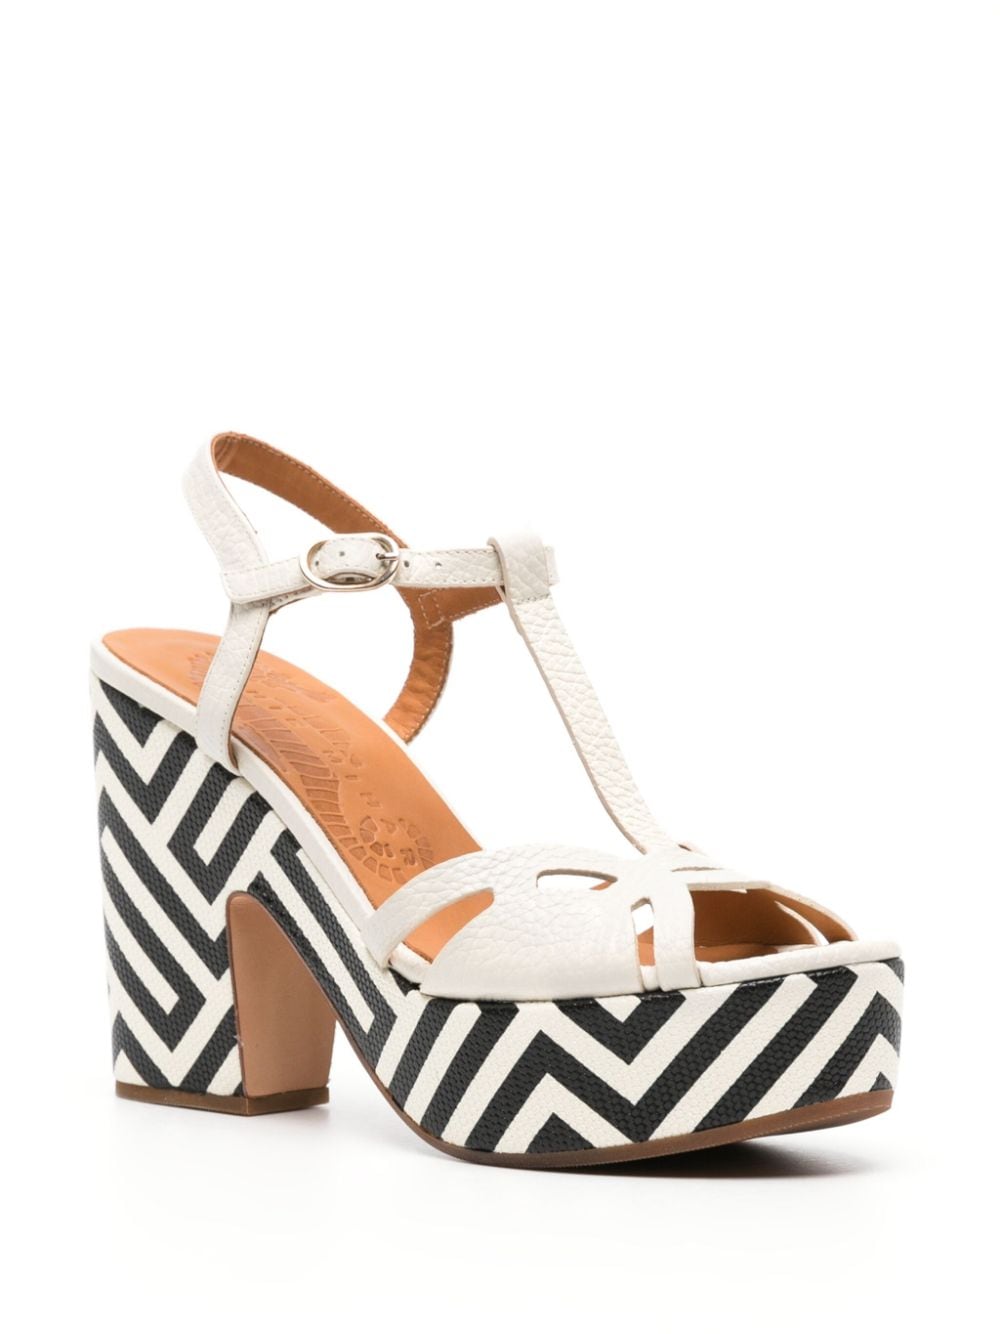 Shop Chie Mihara Jinga 110mm Patterned Sandals In White